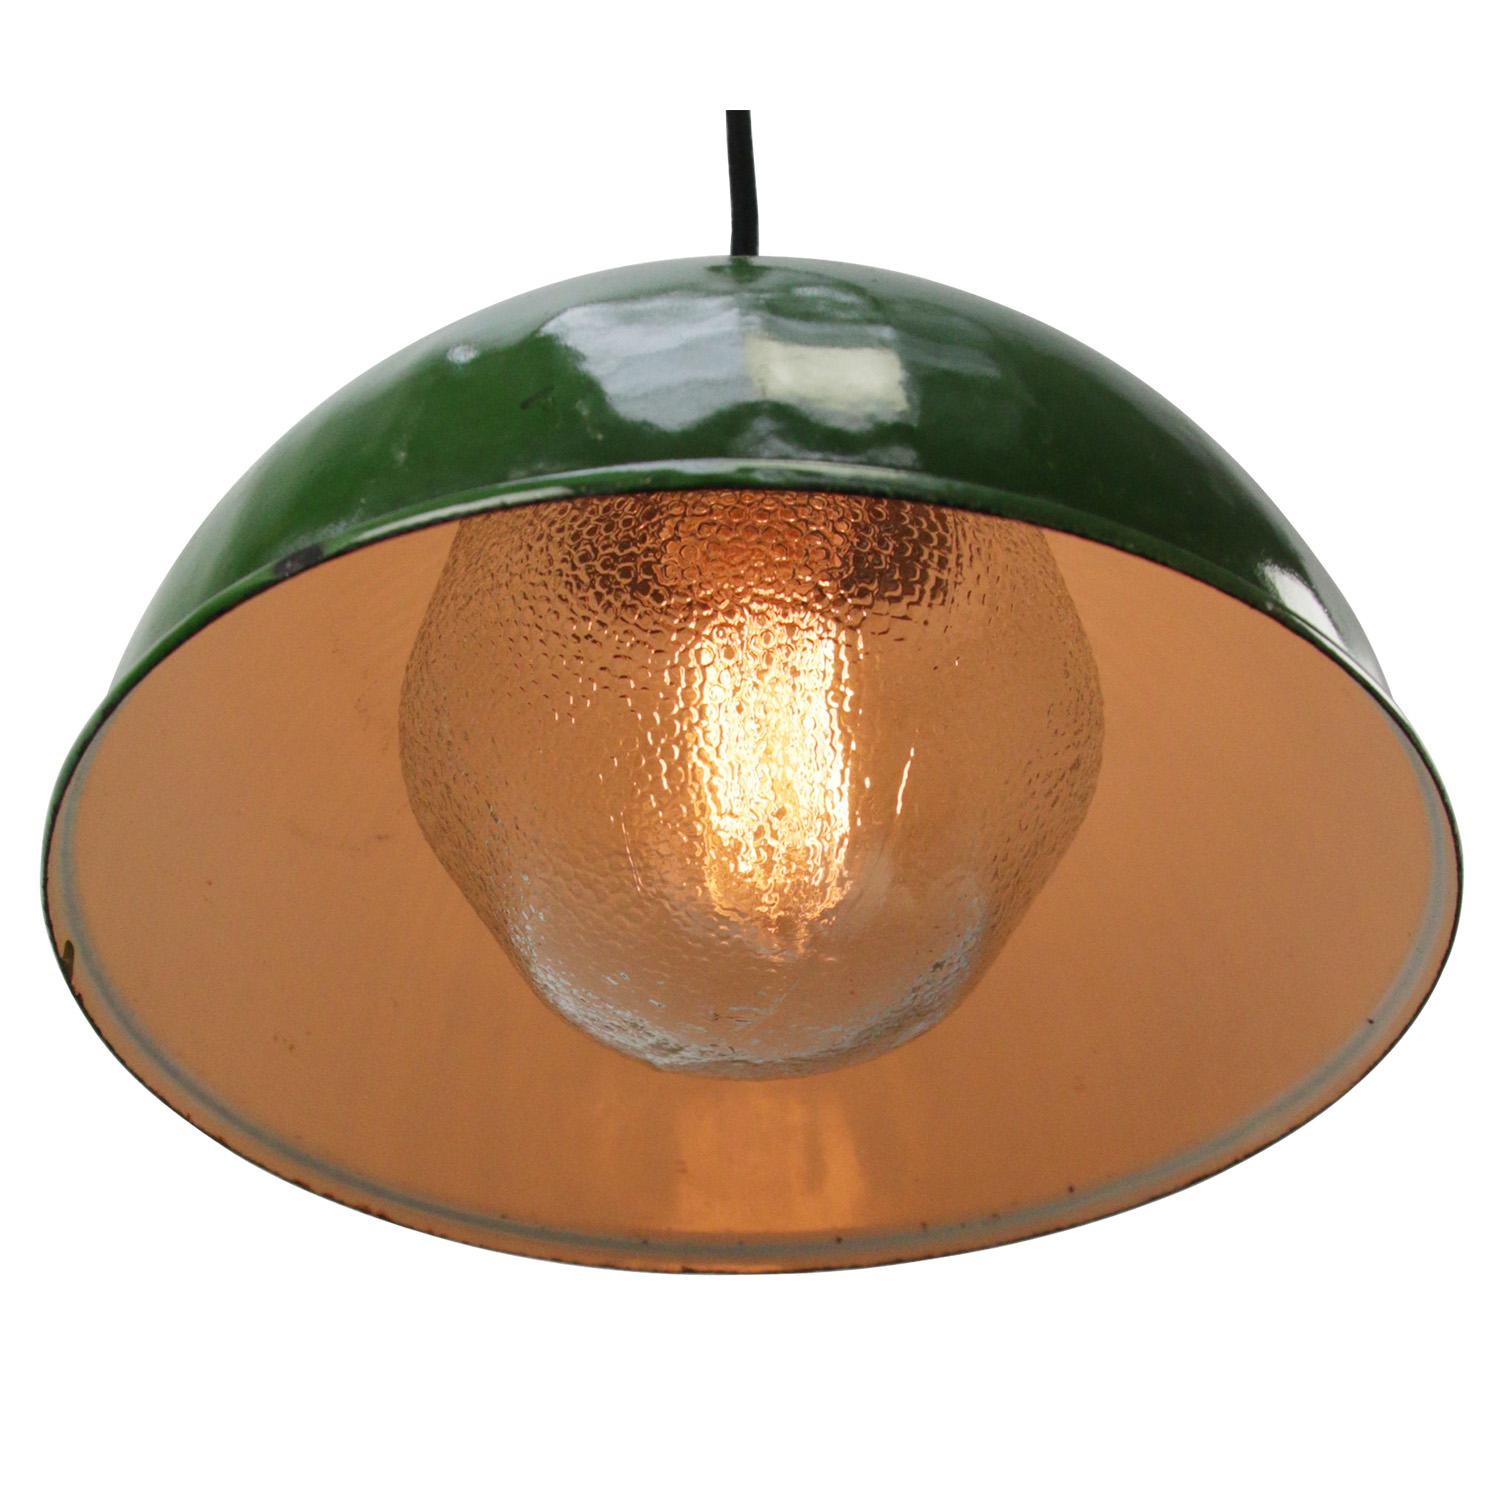 Dark green enamel Industrial hanging lamp.
Frosted glass with brass top.

Weight: 2.35 kg / 5.2 lb

Priced per individual item. All lamps have been made suitable by international standards for incandescent light bulbs, energy-efficient and LED